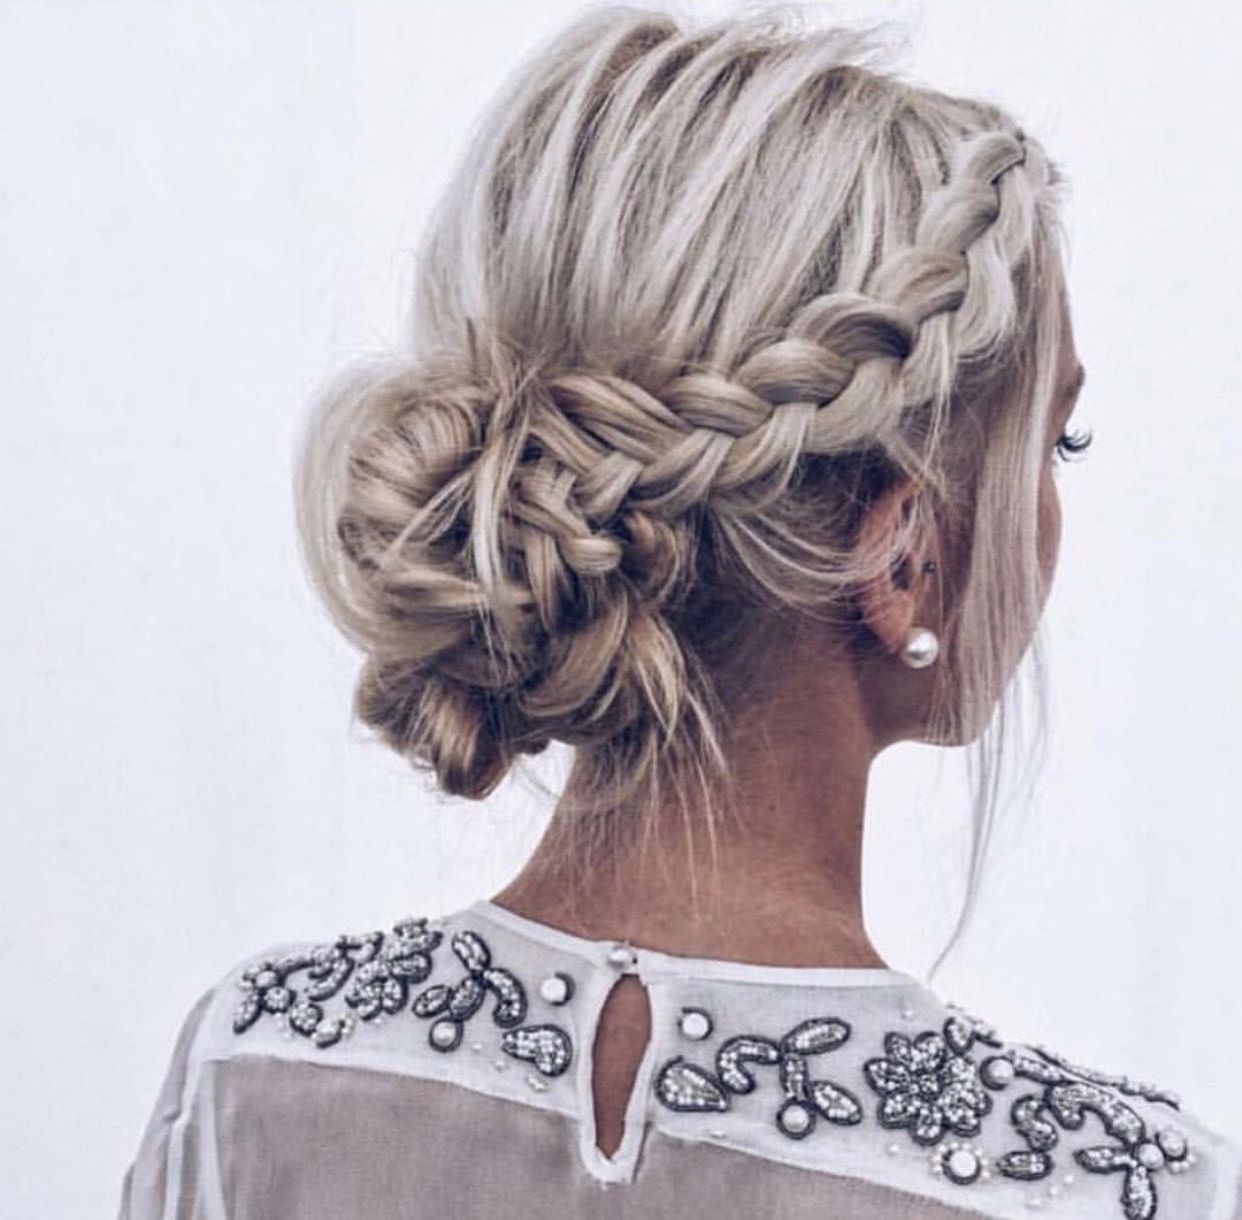 The Perfect Braided Updo: Teased, Messy Side Braid Fading In Most Up To Date Teased Fishtail Bun Updo Hairstyles (View 5 of 20)